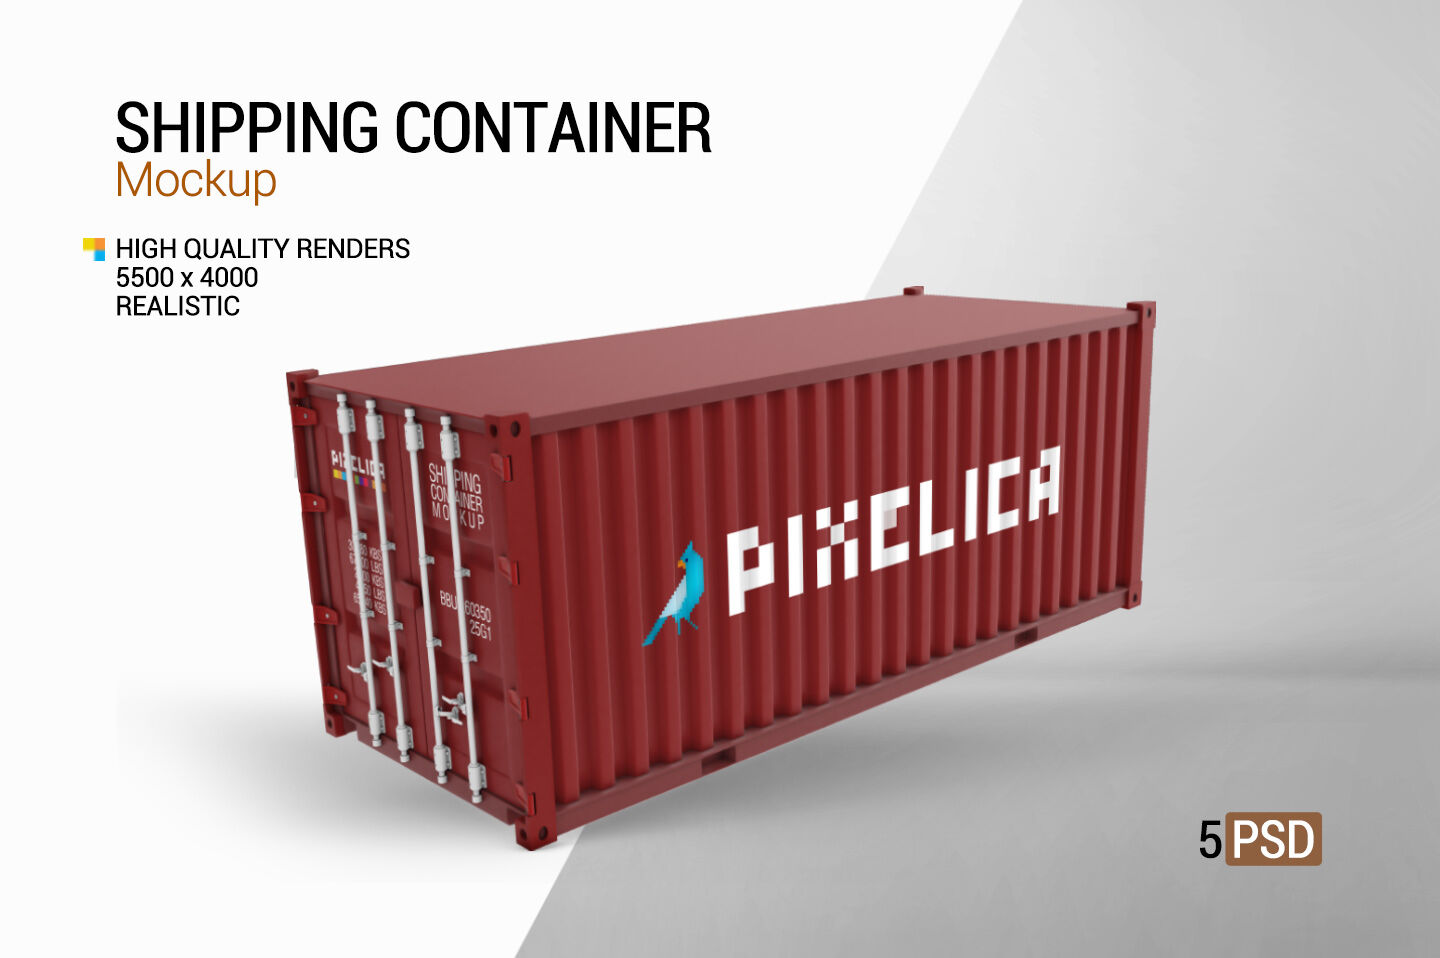 Download Shipping Container Mockup By Pixelica21 Thehungryjpeg Com